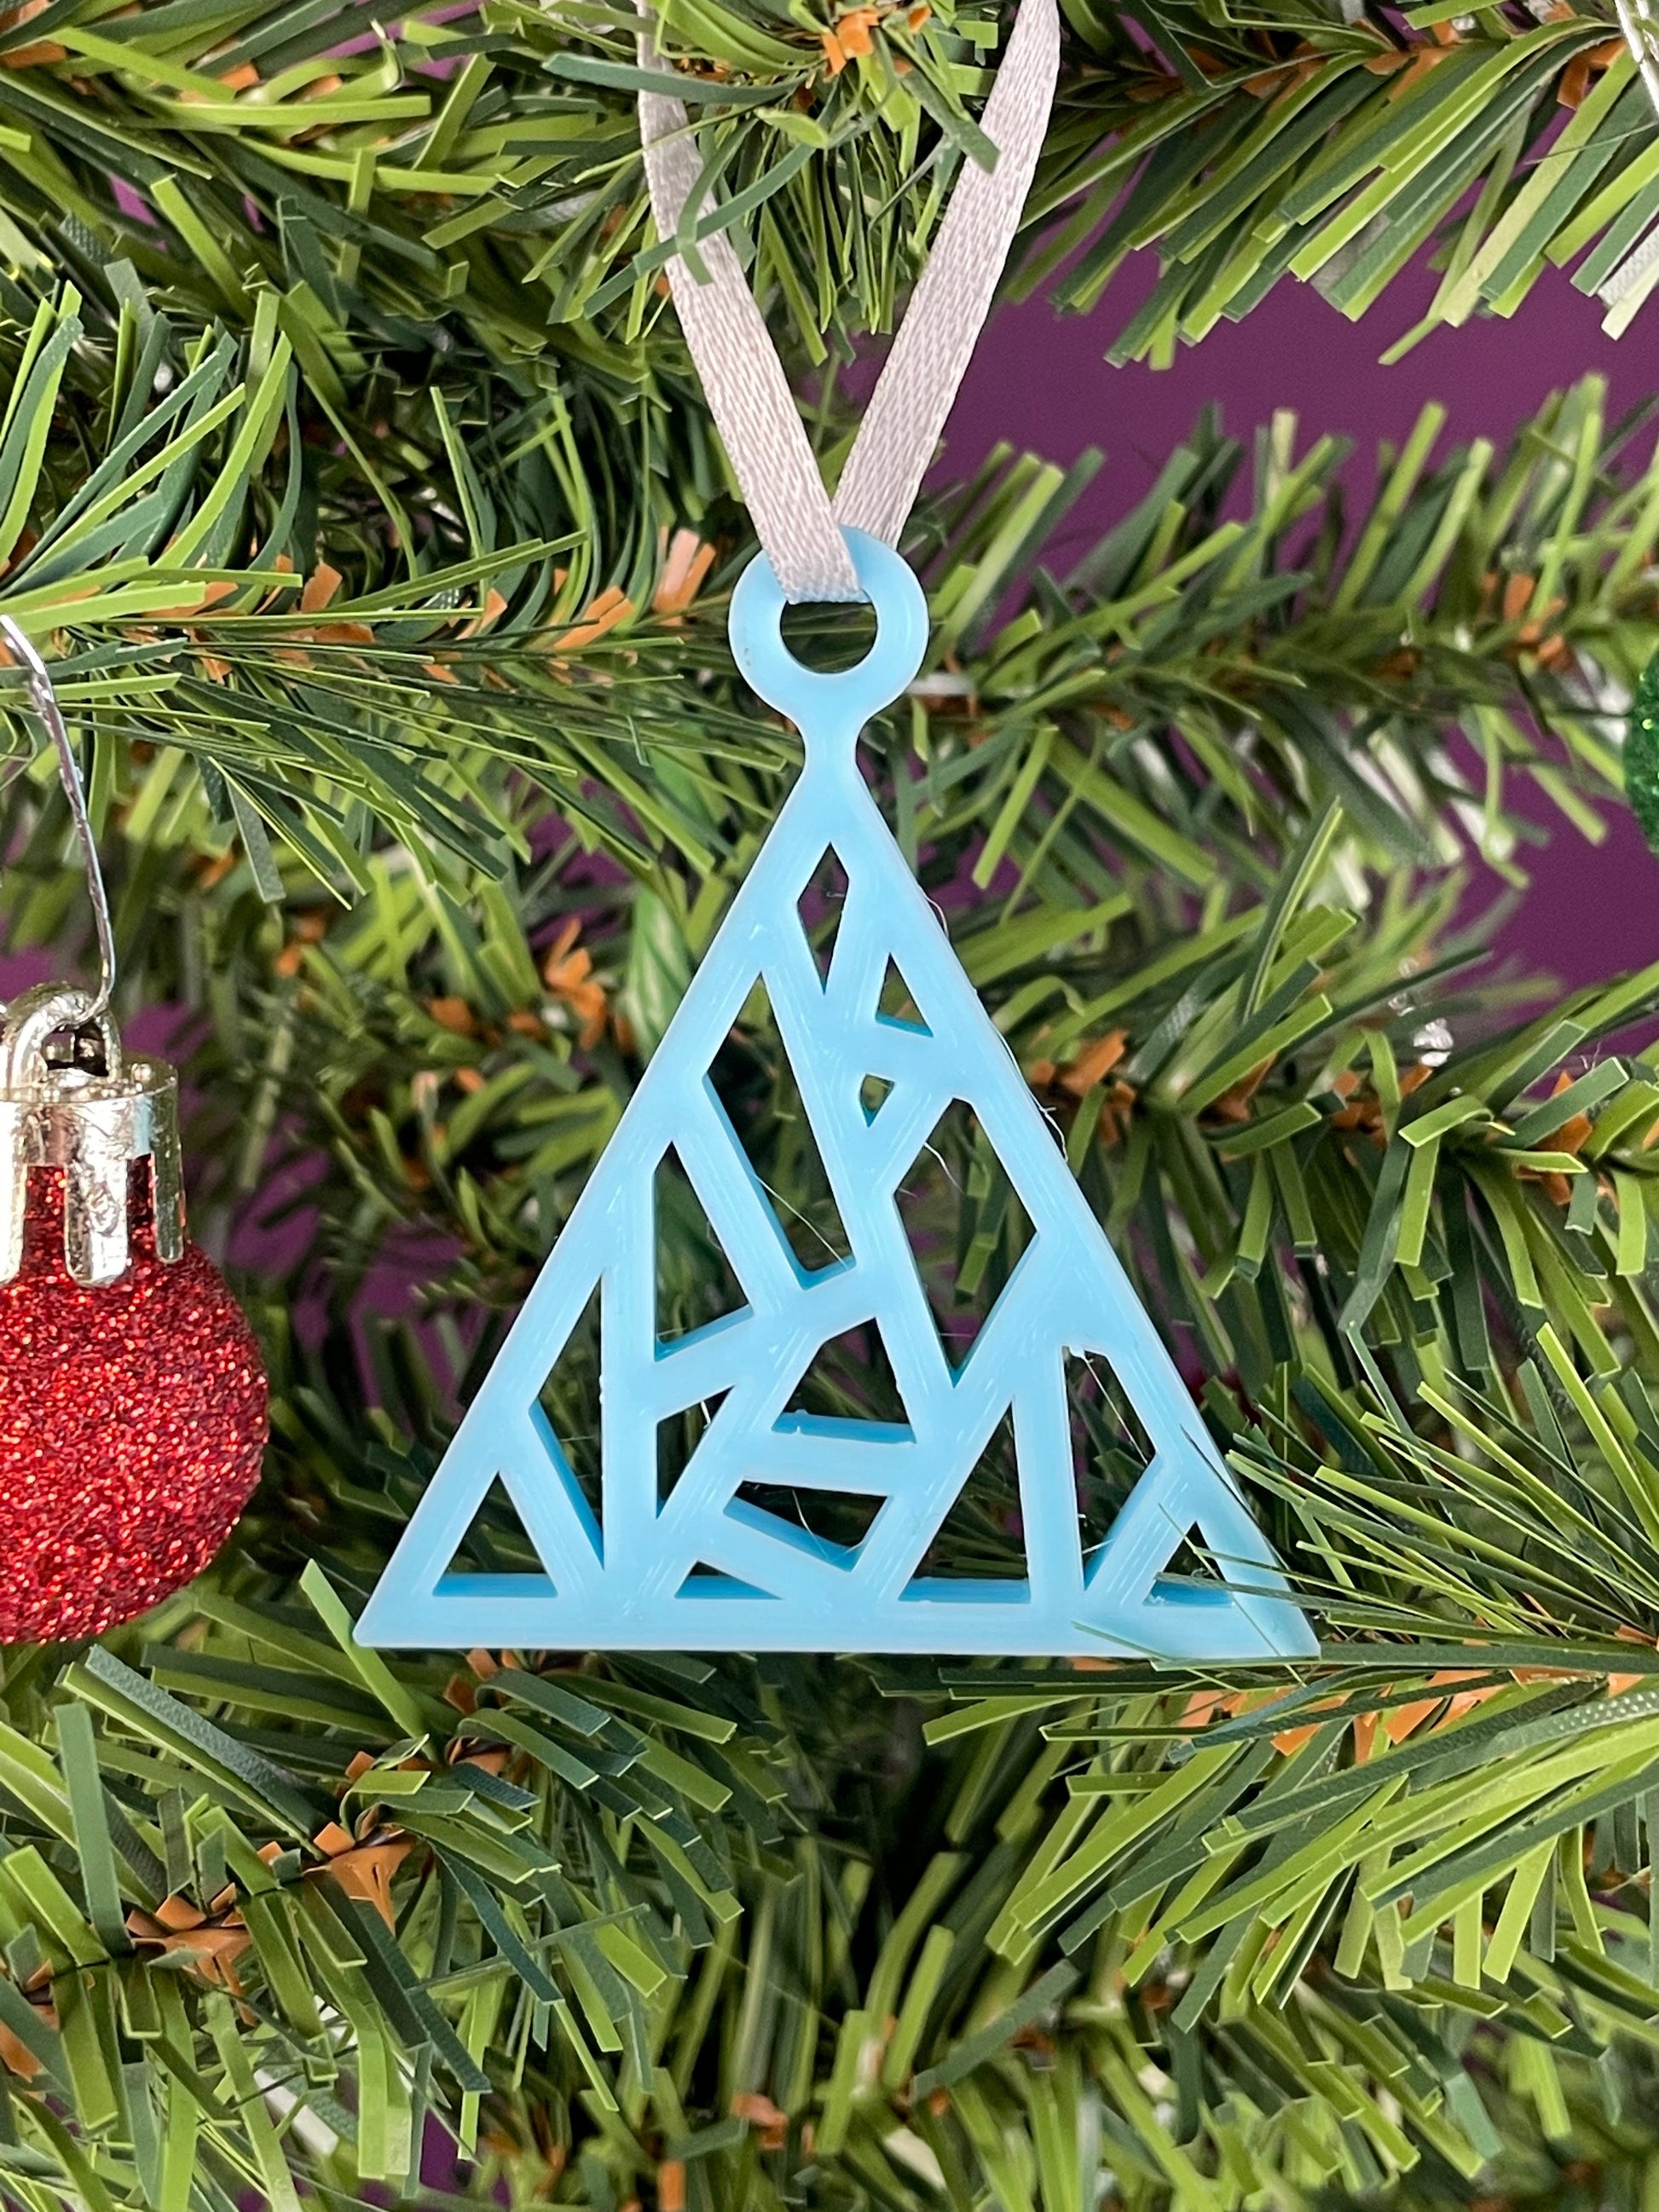 A close up of a fractal tree ornament printed in light blue filament hung on a christmas tree with a purple background.